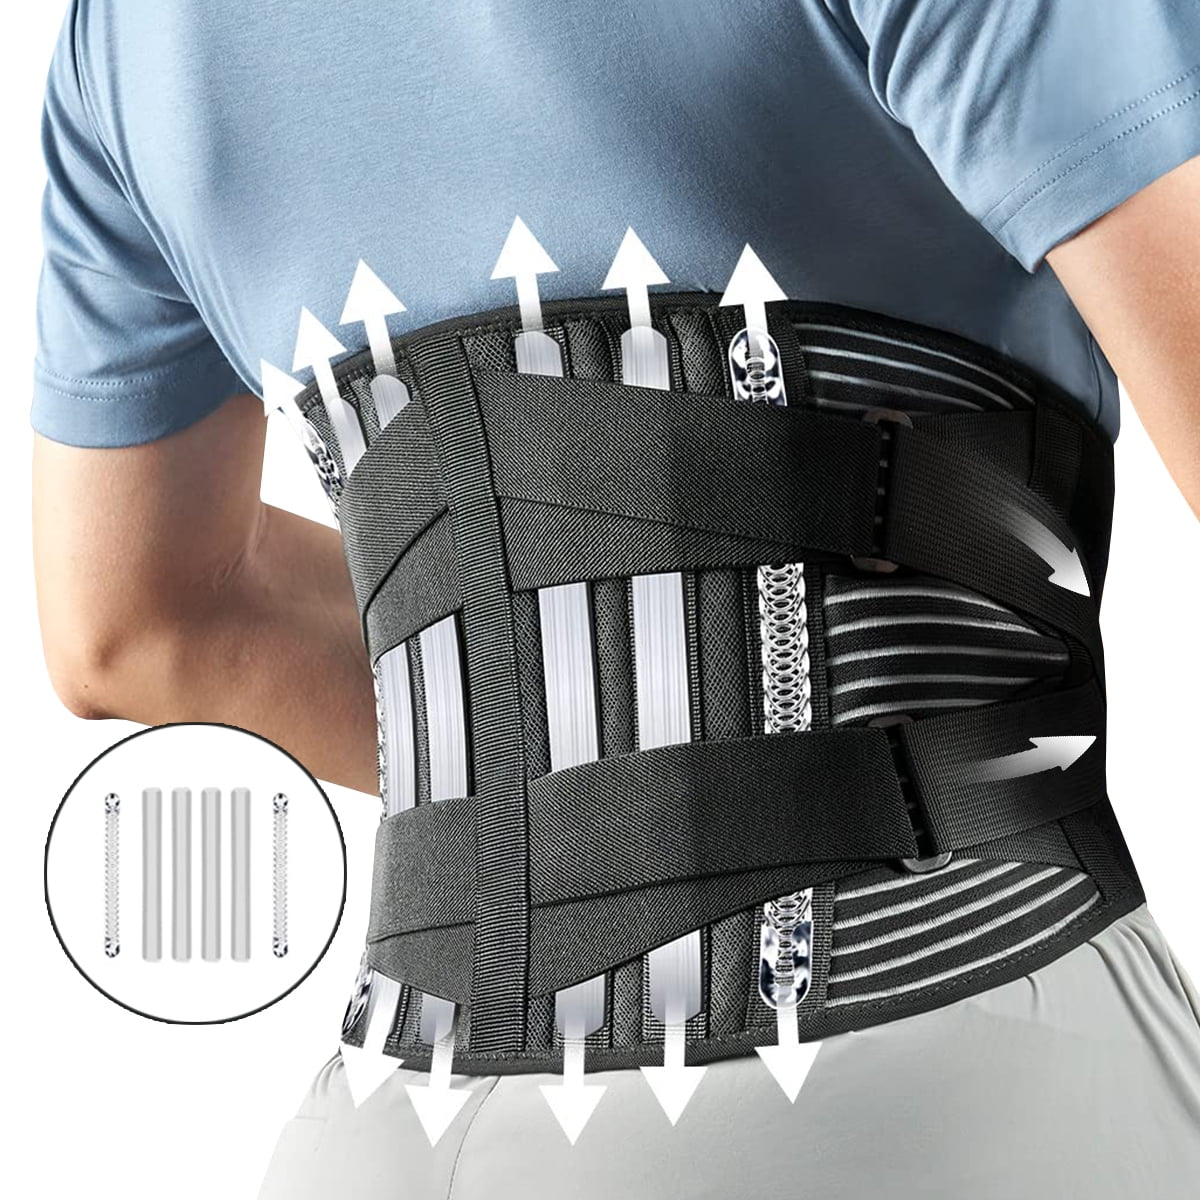 Back Brace for Lower Back Pain Relief with 3D Lumbar Pad, 6X Back